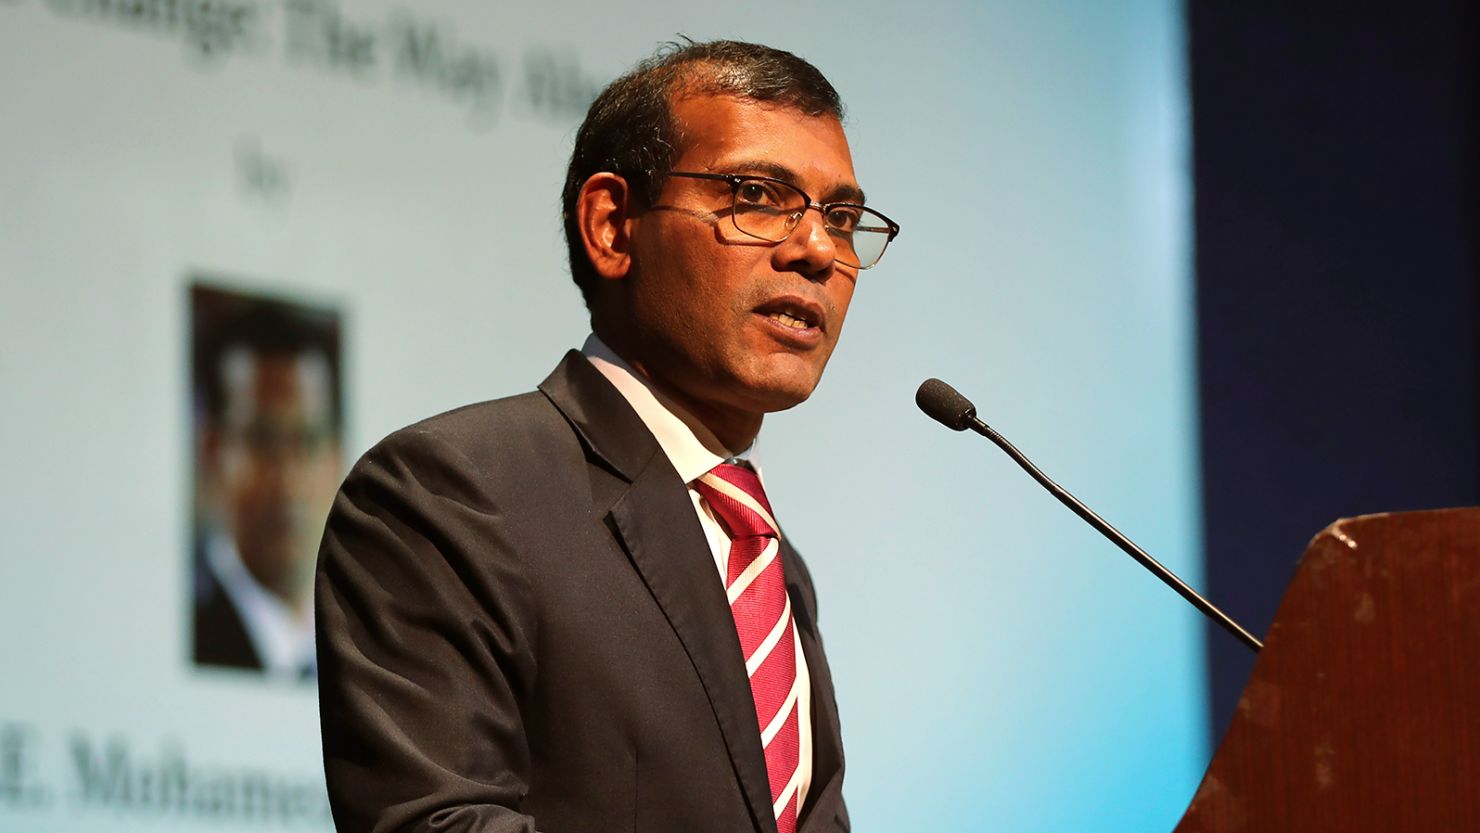 Former Maldives President Mohamed Nasheed delivers a lecture in New Delhi, India, on February 14, 2019.